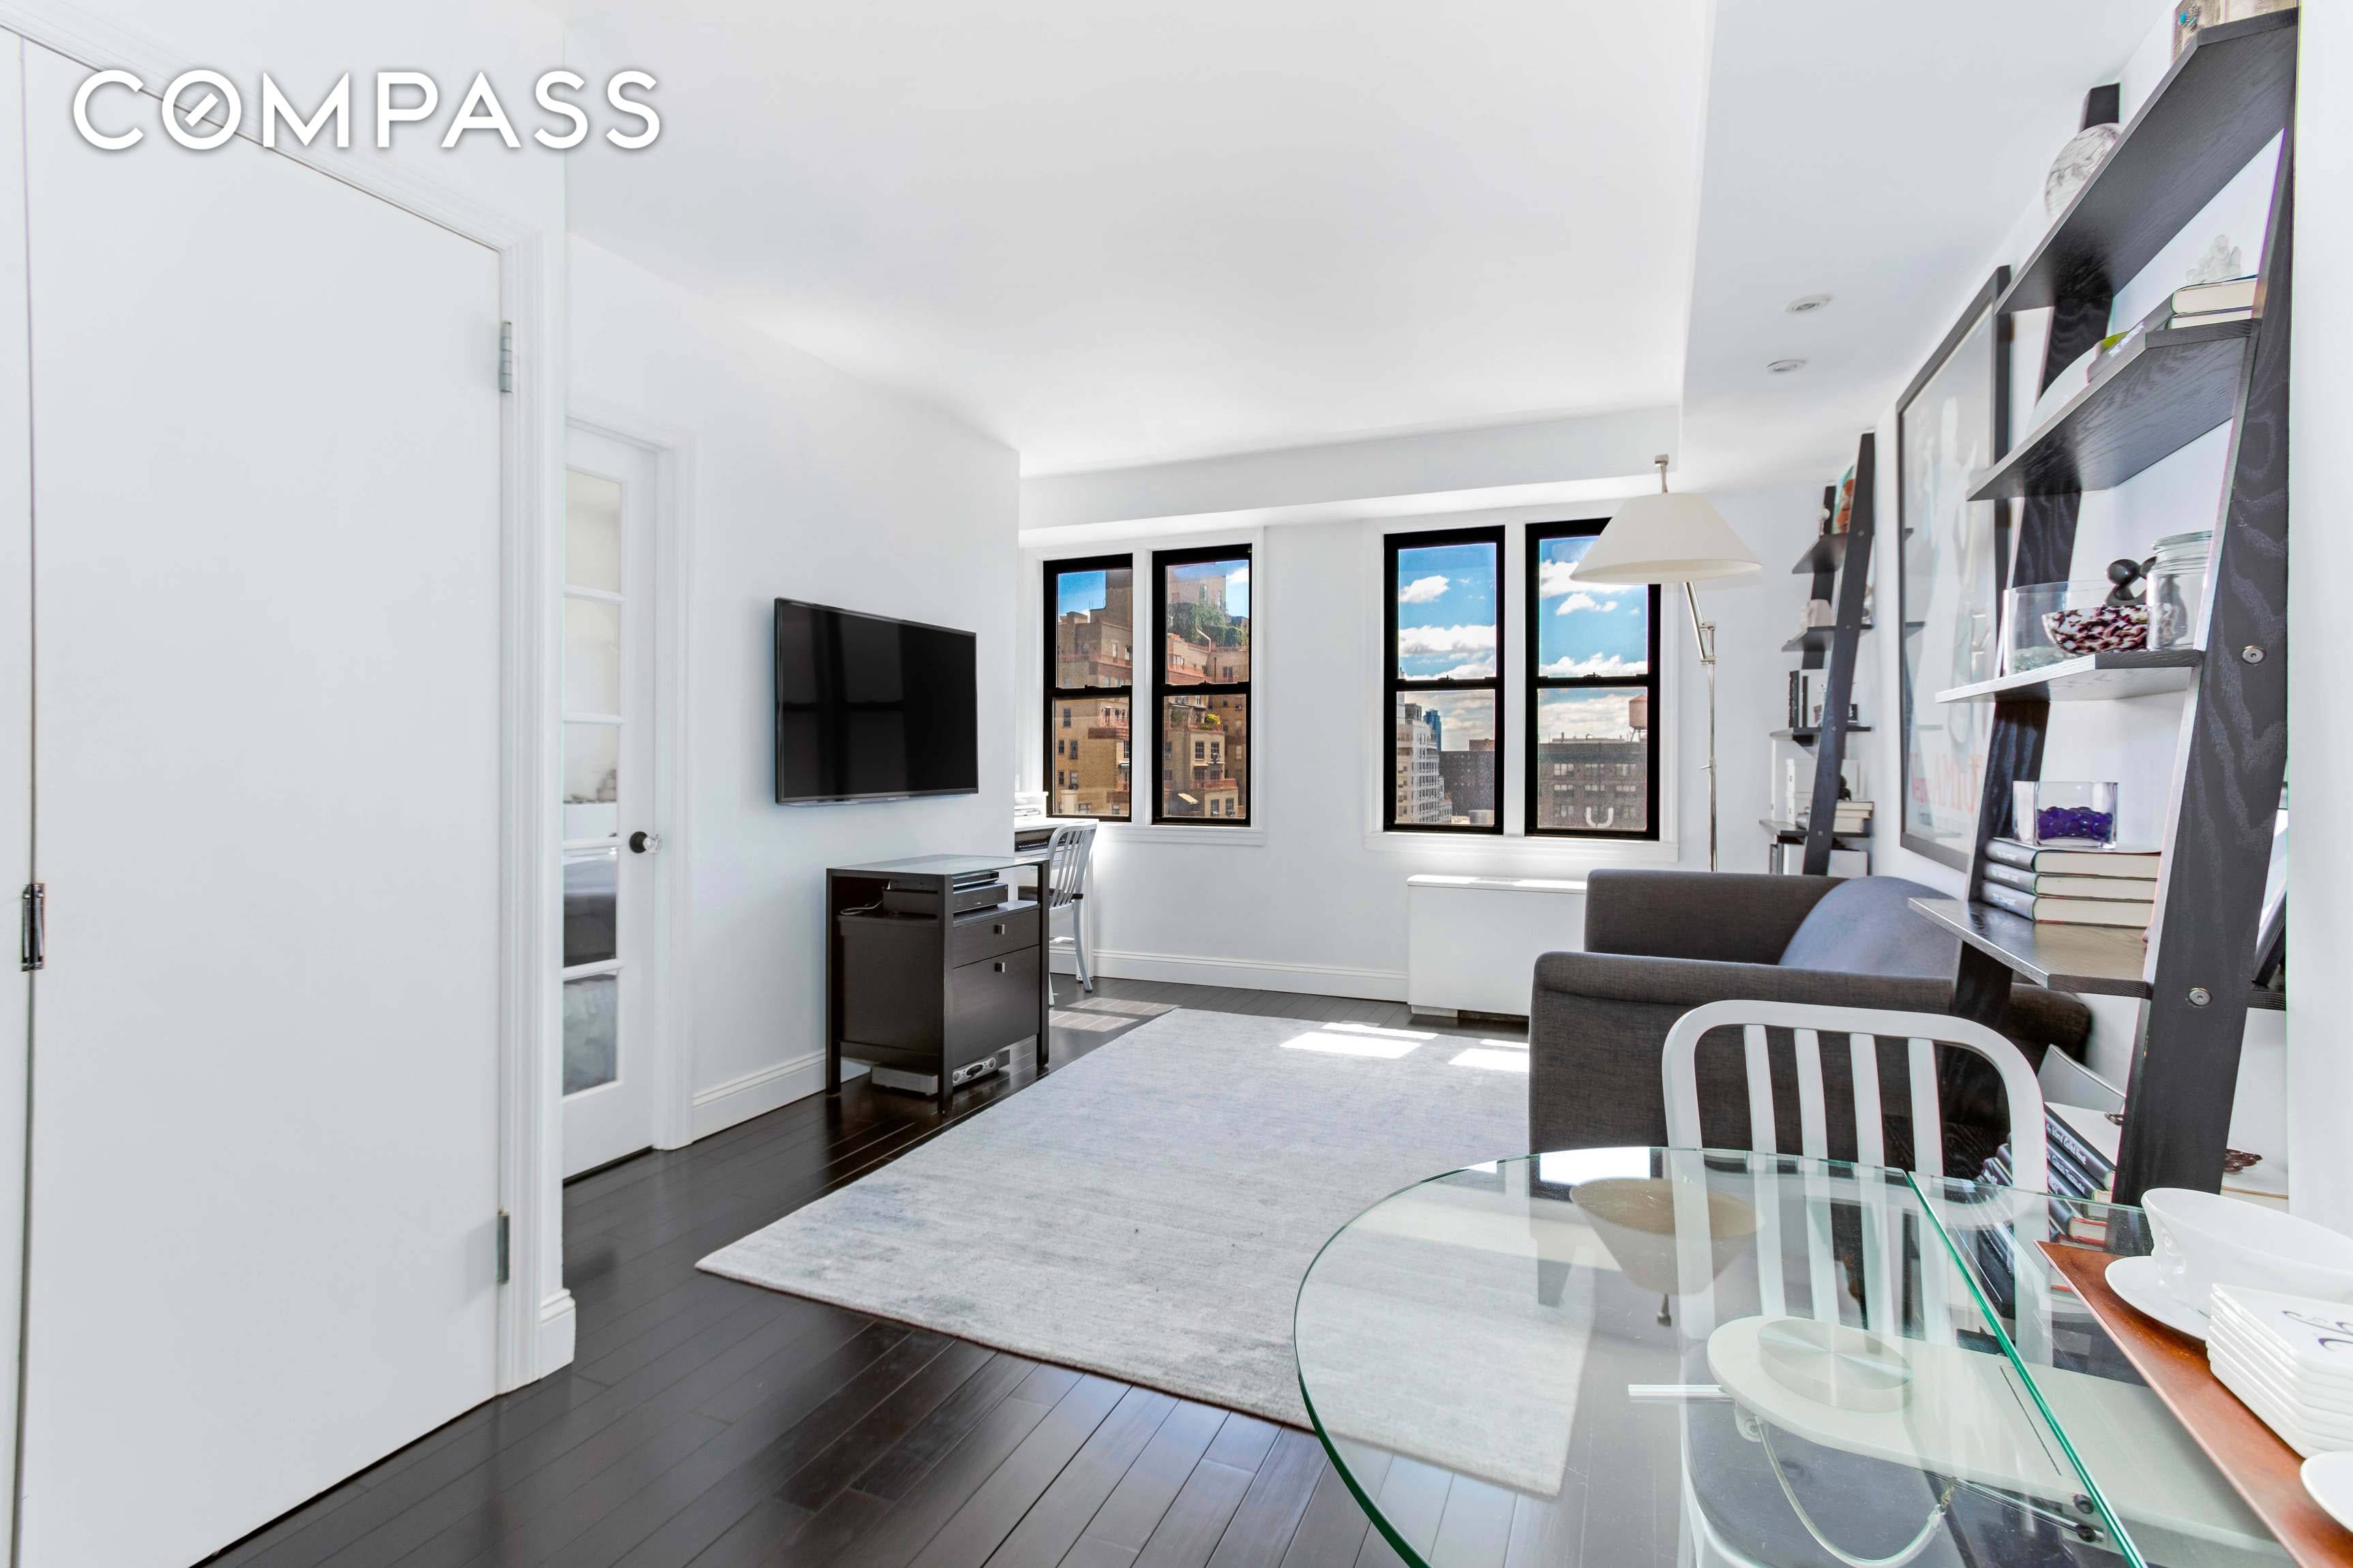 Make your Gramercy dreams come true in this completely gut renovated, smartly converted one bedroom, one bathroom home featuring fantastic light and views in a premier full service co op.